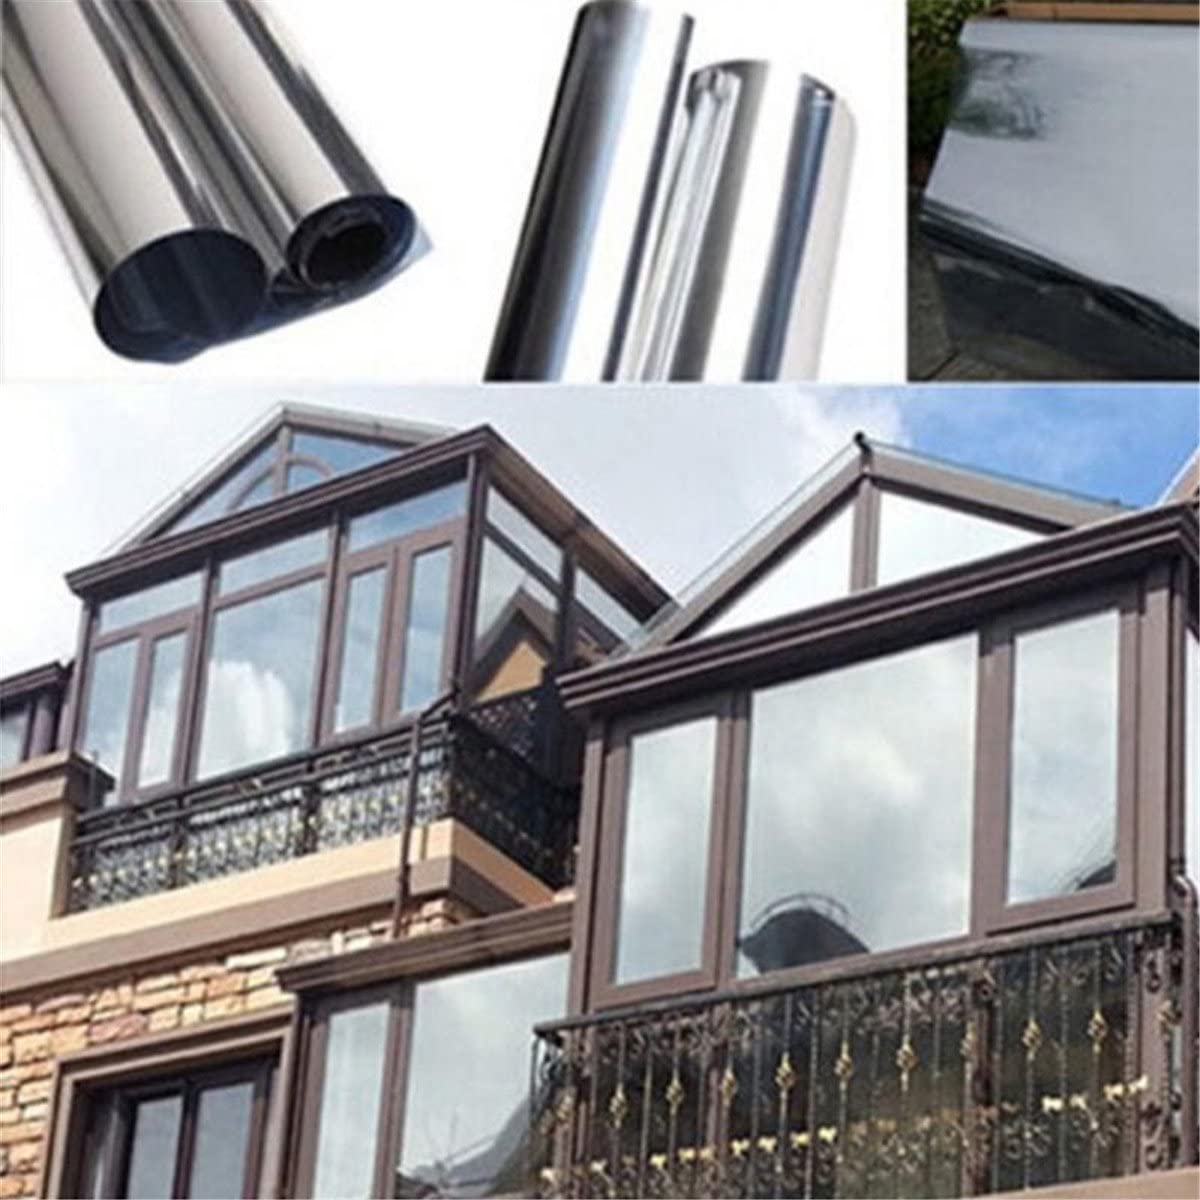 Windows-Tint-Film-UV-proof-Privacy-Protection-Heat-Insulation-Glass-Films-1696241-8